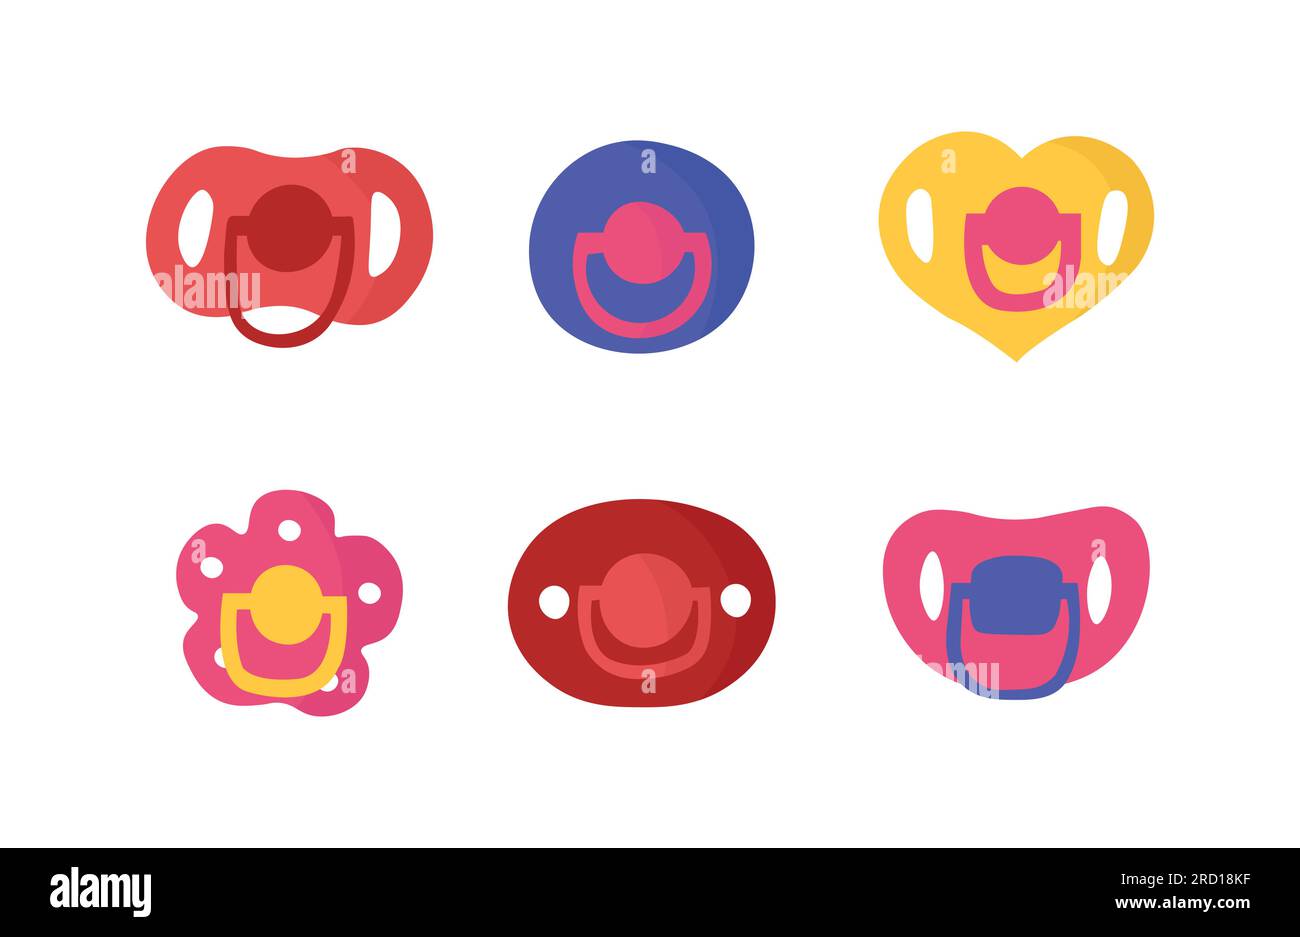 Cartoon baby pacifiers set with colors. Yellow and red floral shapes. Stock Vector